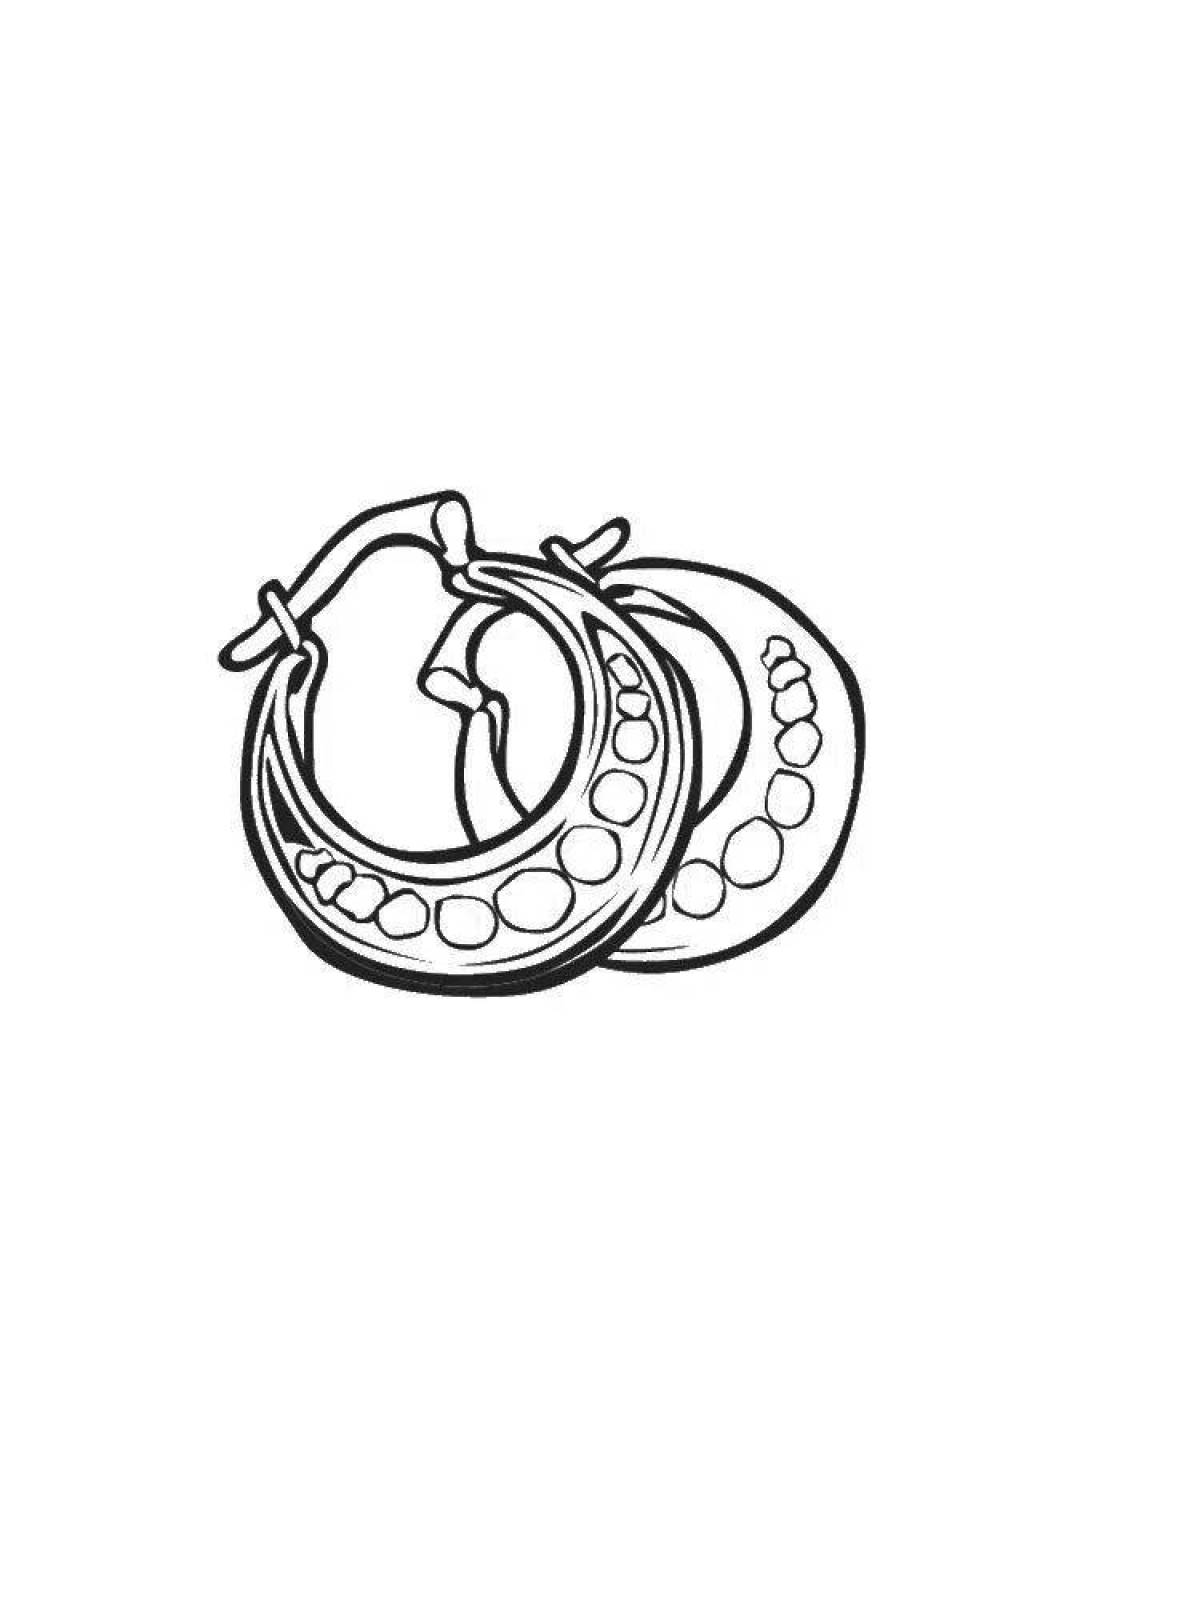 Coloring page graceful earrings